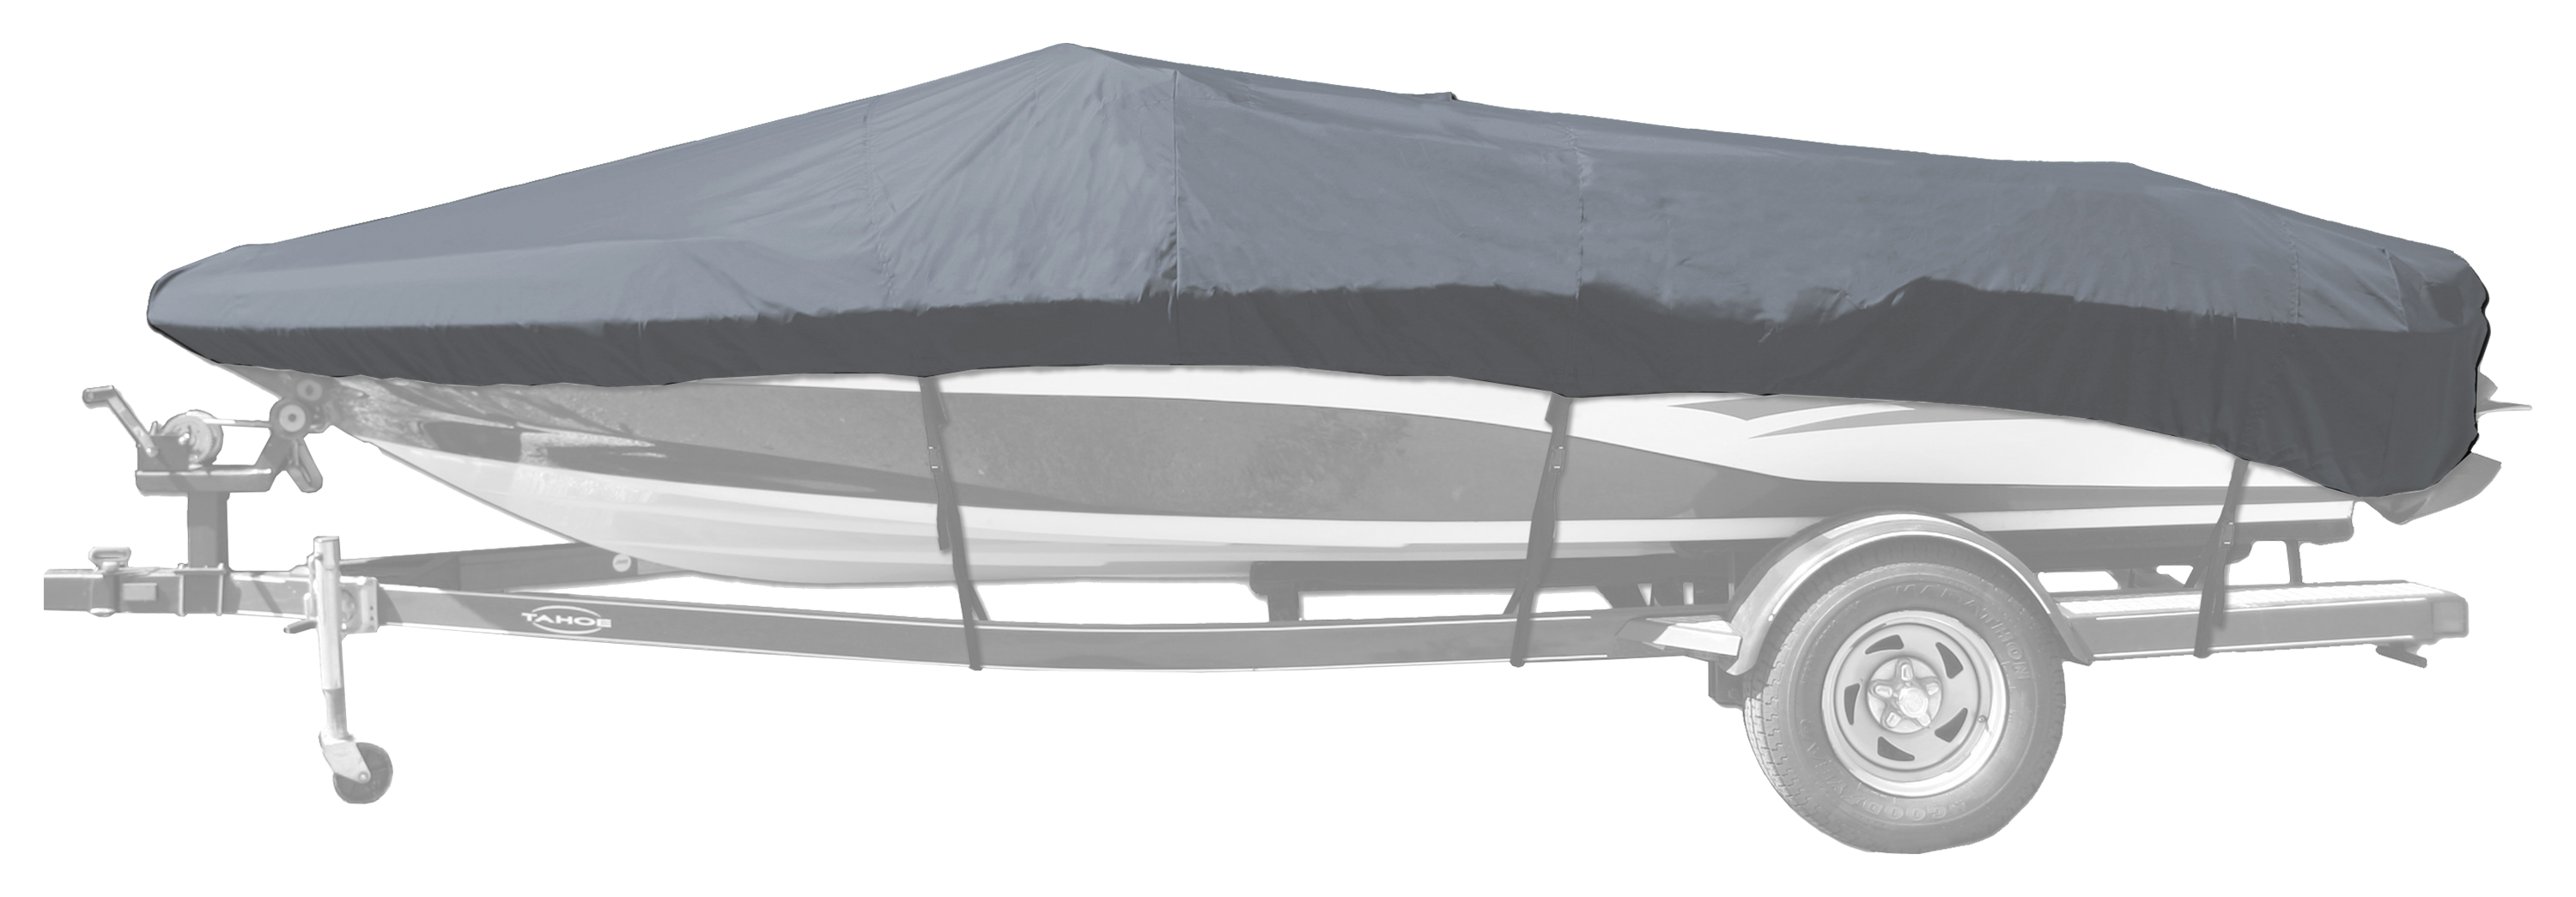 Bass Pro Shops Select Fit Hurricane Boat Cover by Westland for Euro V-Hull Runabout I/O Model - Gray - 20'6'' to 21'5